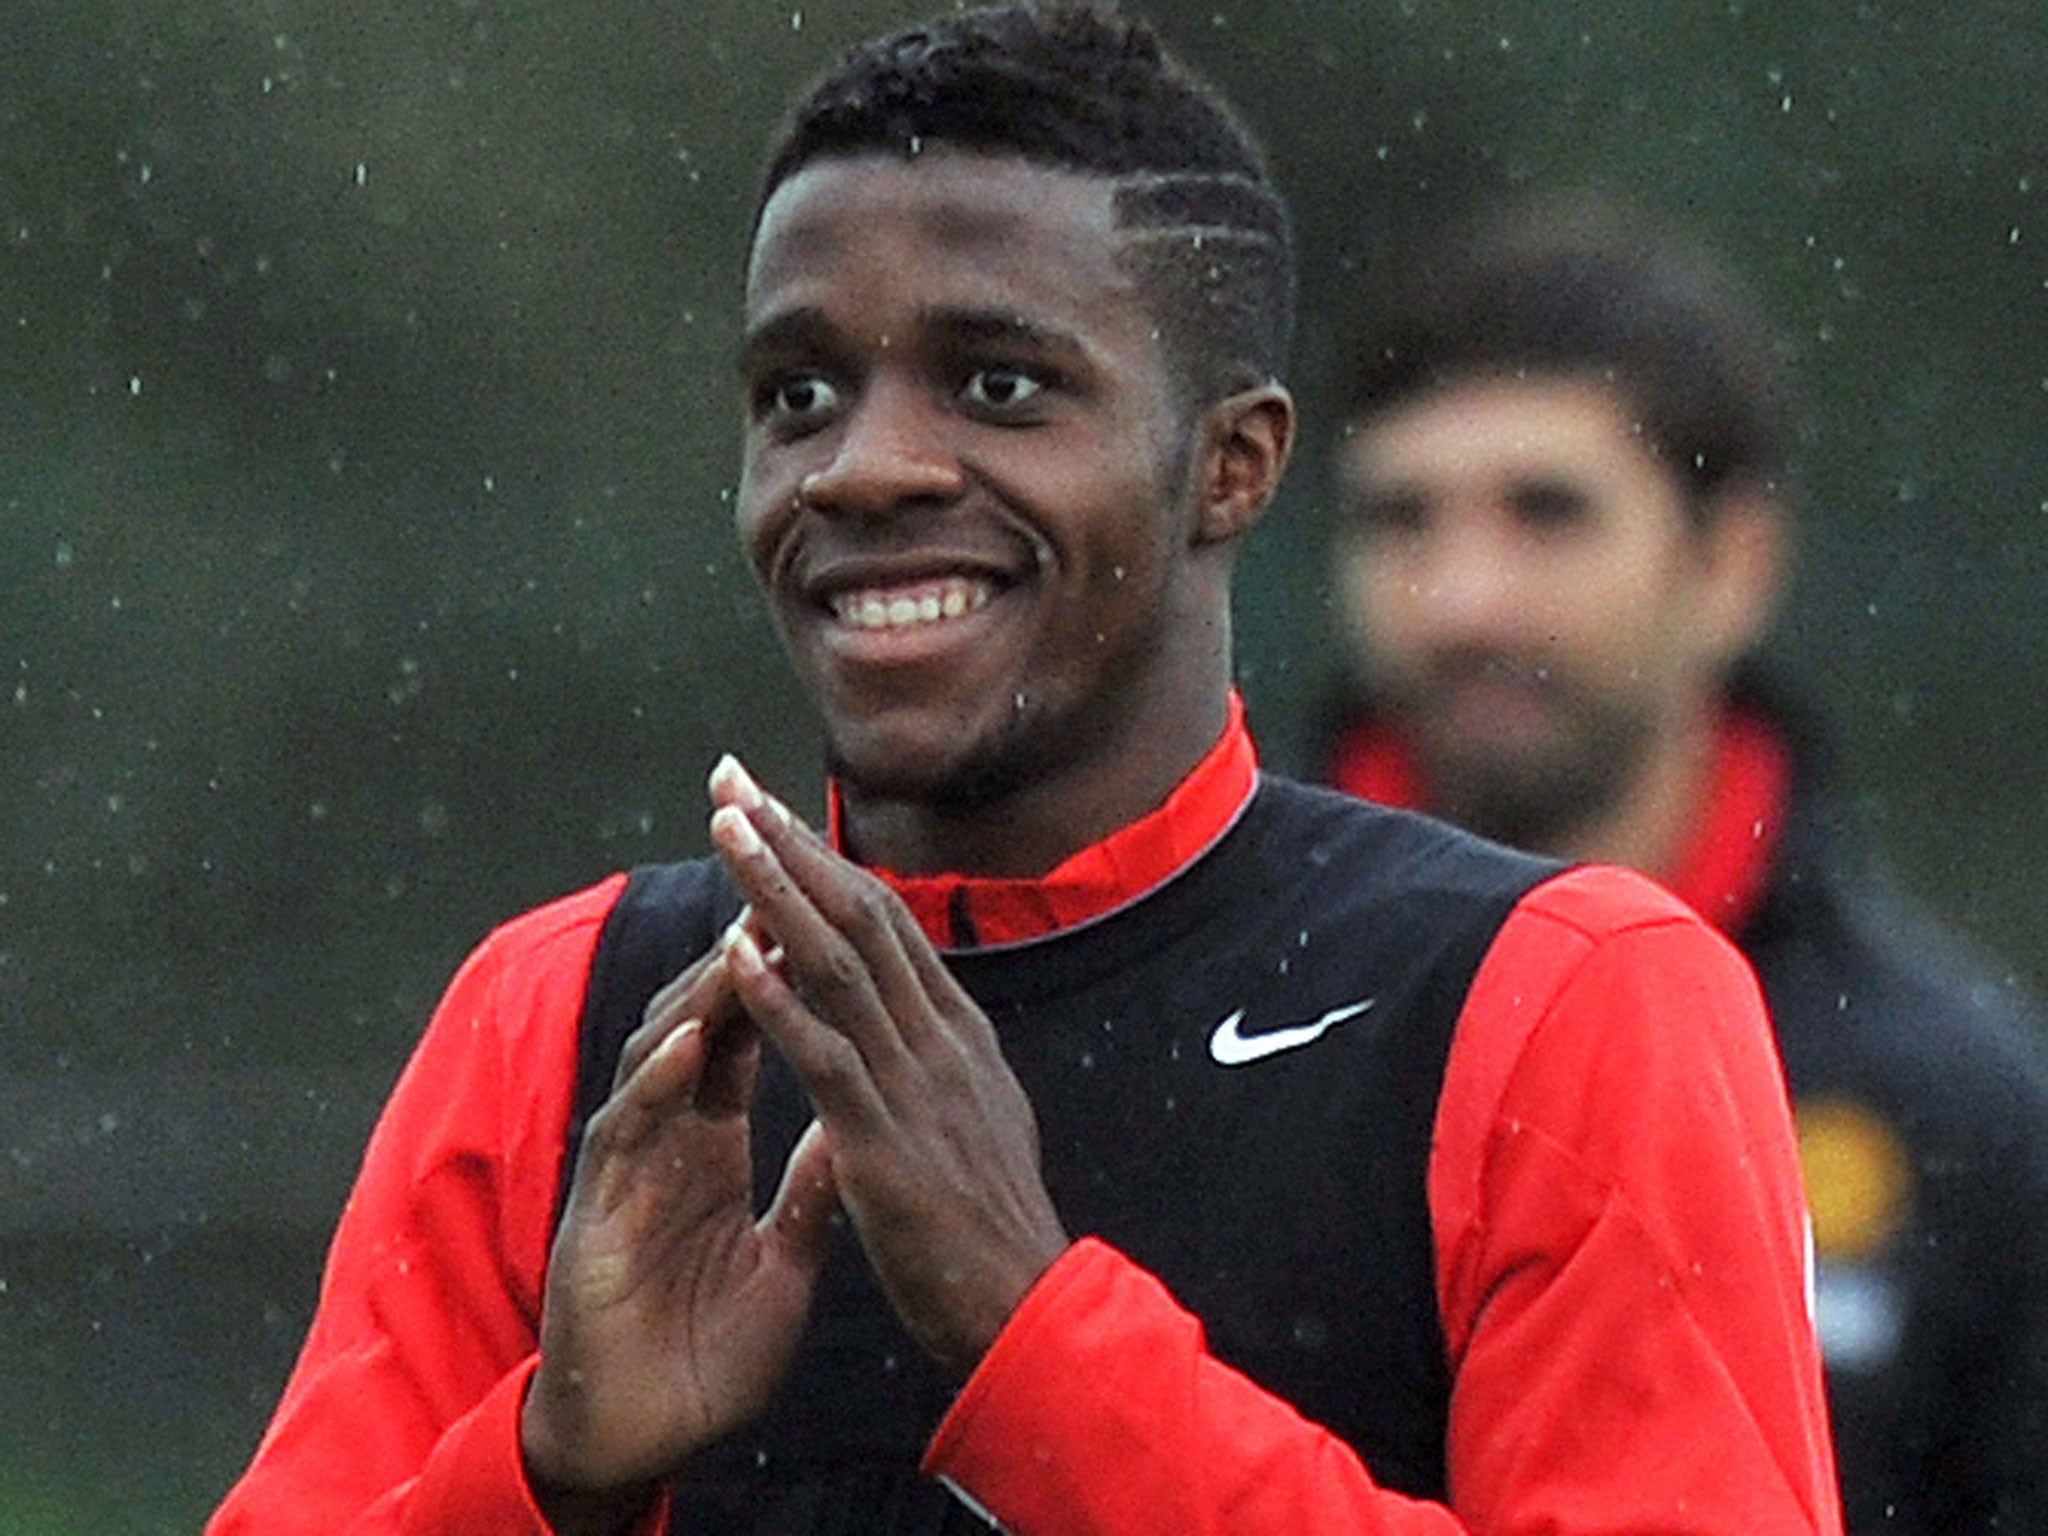 Wilfried Zaha is expected to feature for Manchester United against Norwich